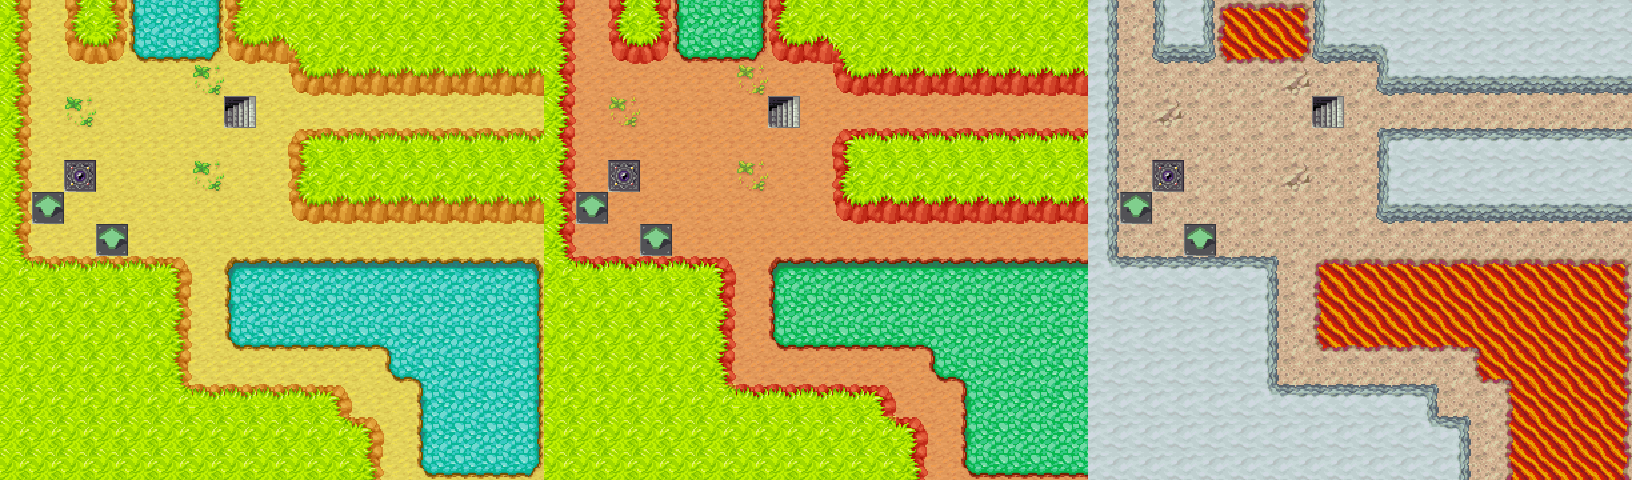 pmd_biomes_by_rayquaza_dot-d61y80d.png